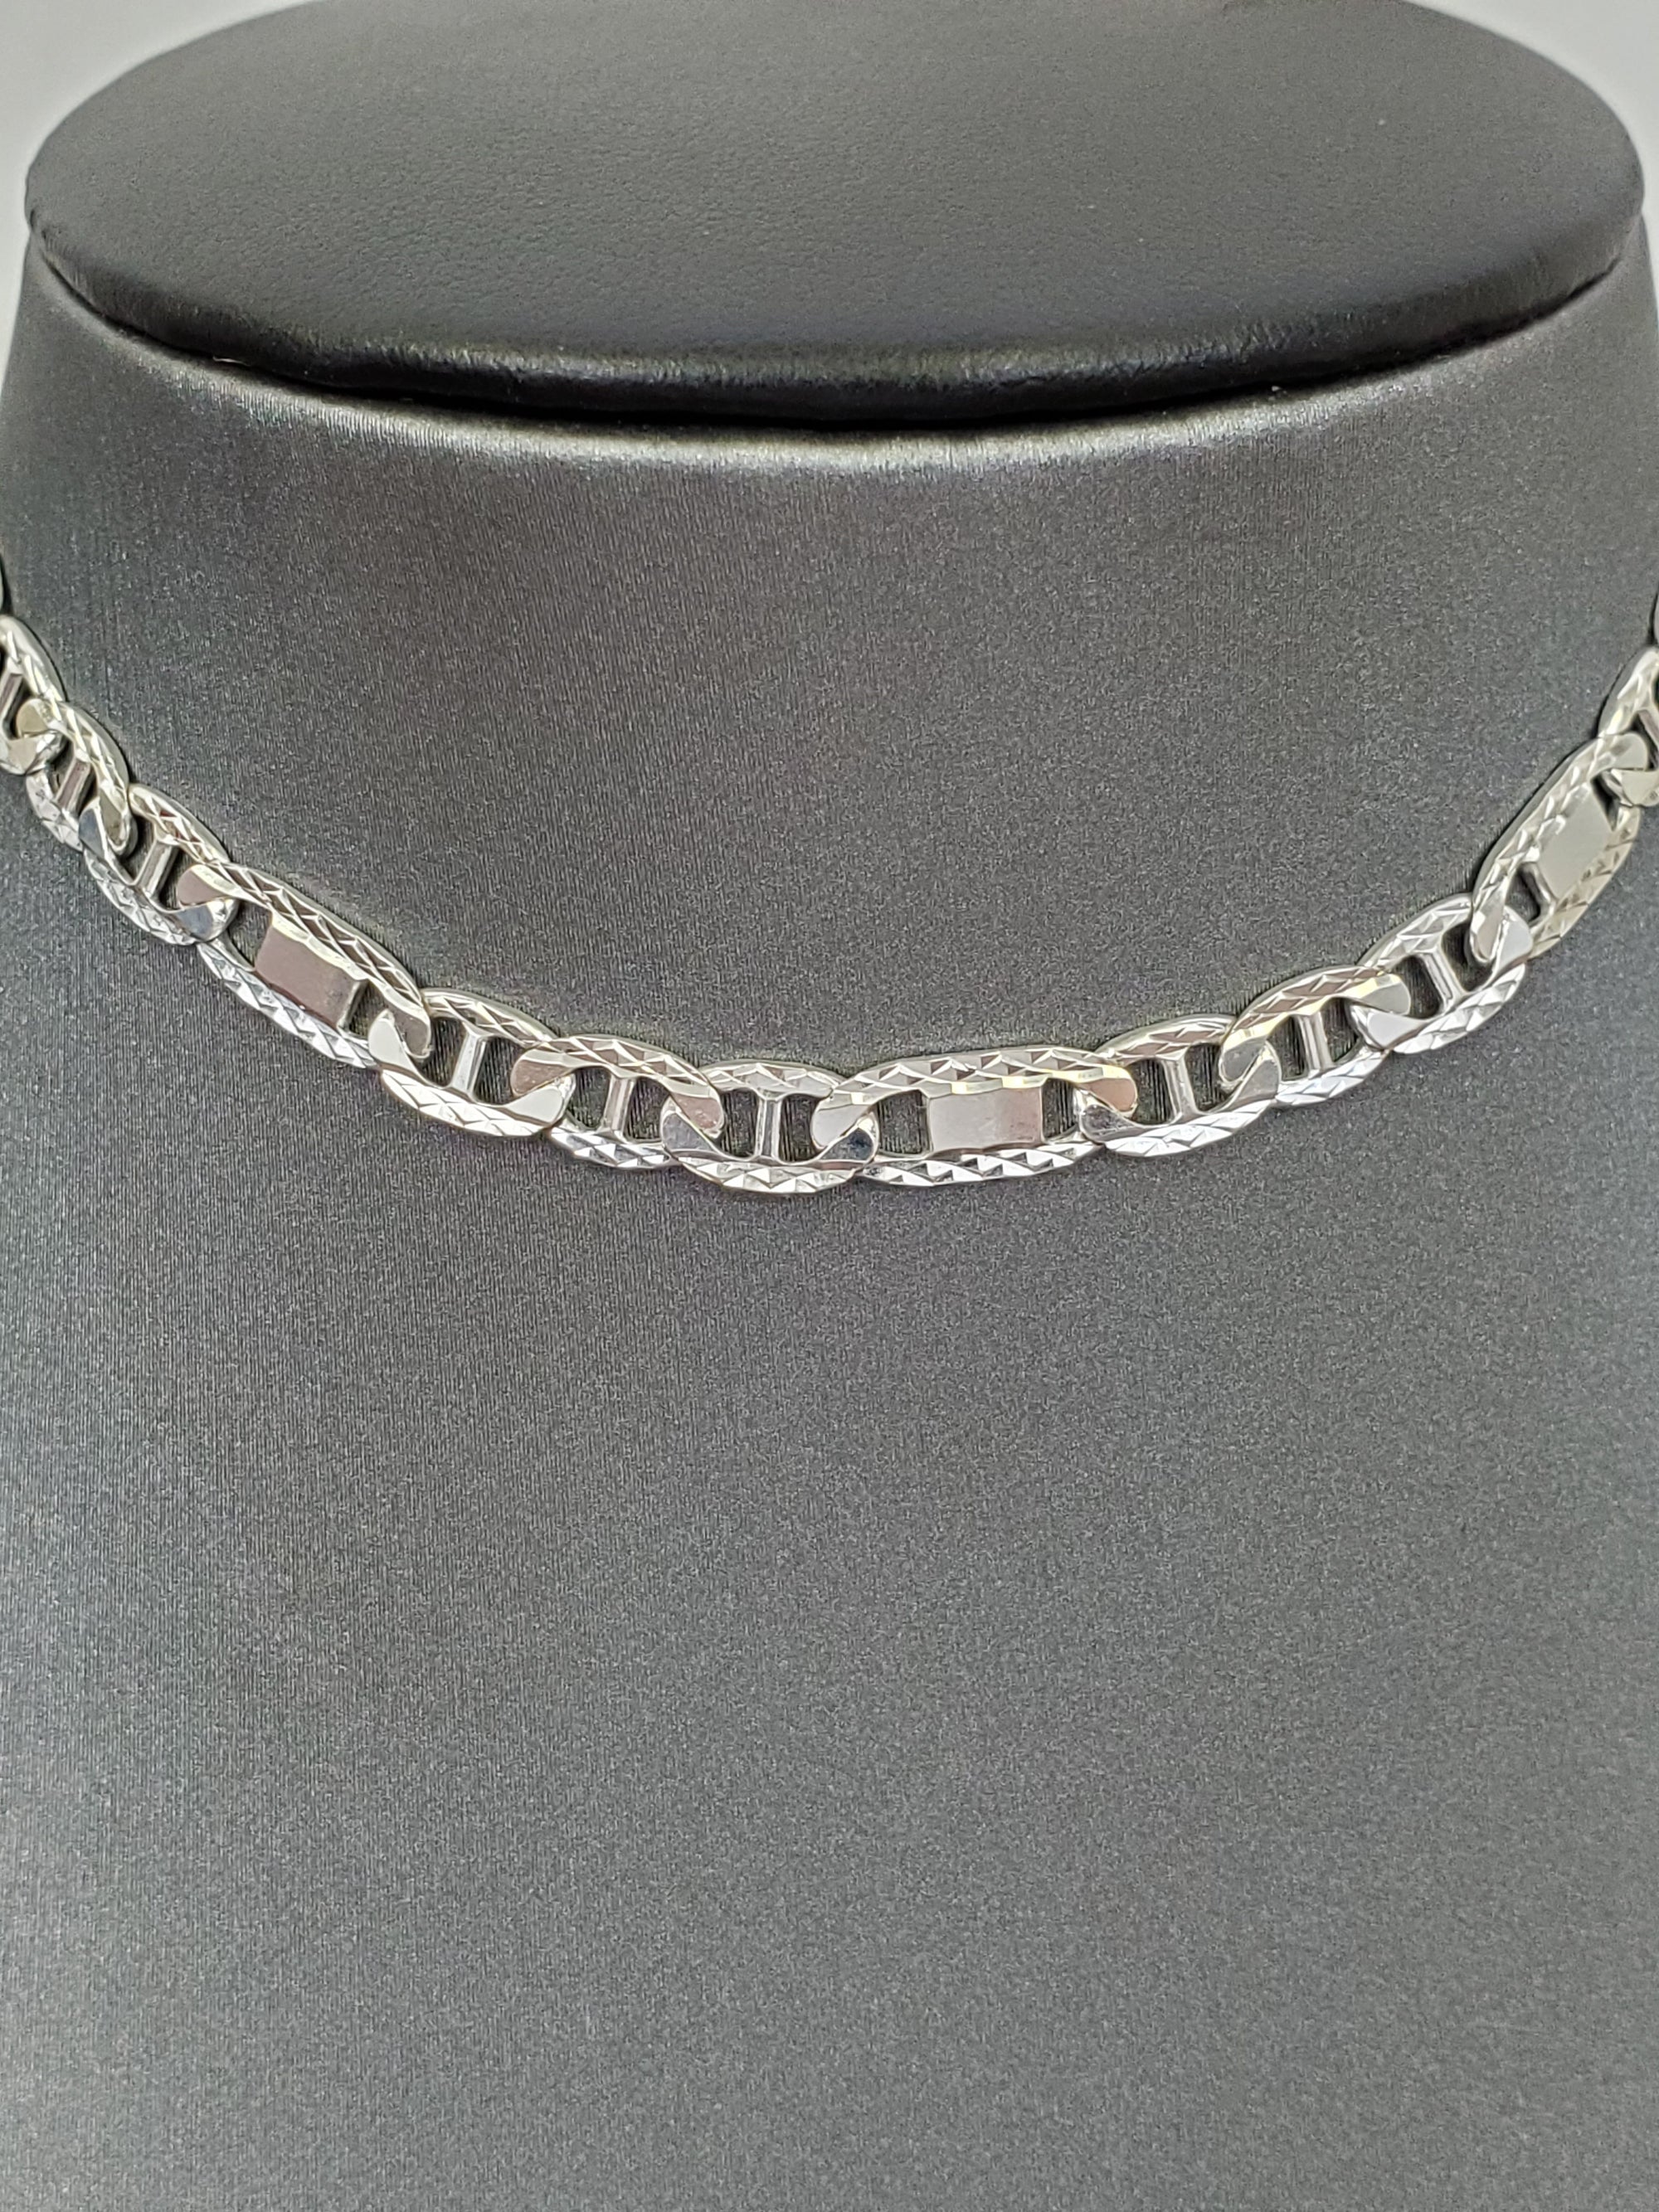 925 Sterling Silver Mirror Link Bracelet 9" (Made in Italy)